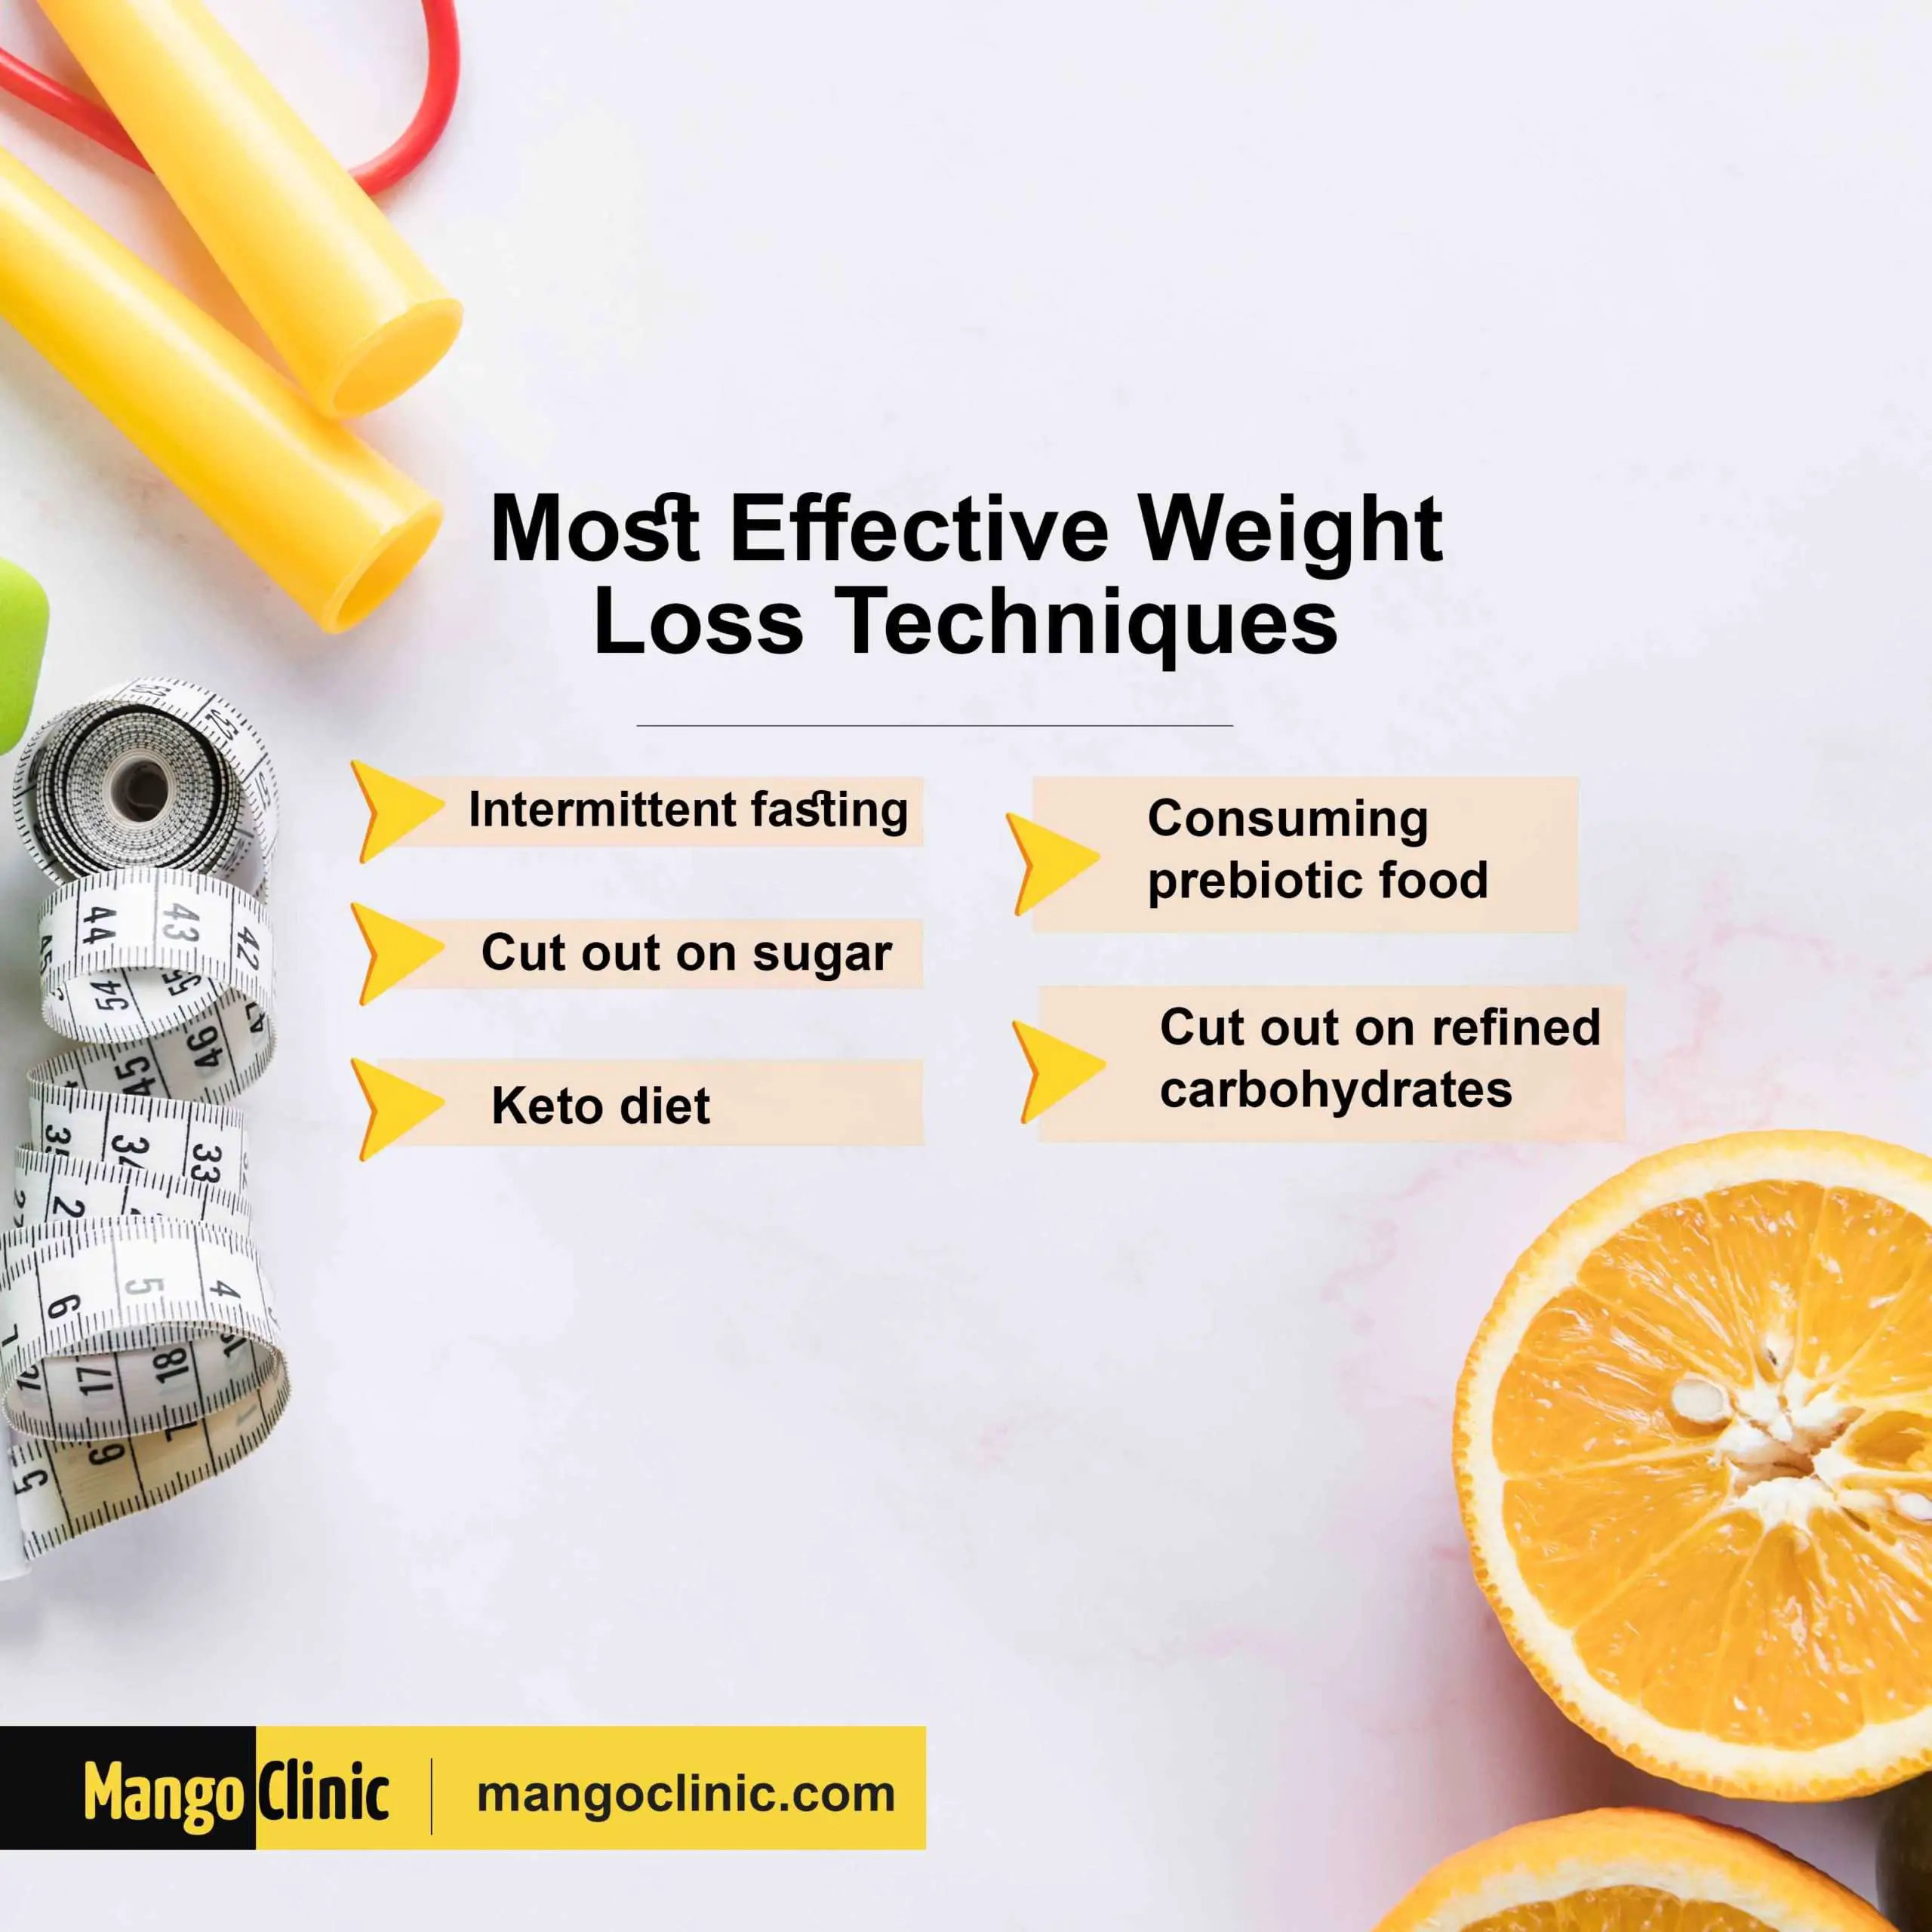 How Intermittent Fasting Help With Weight Loss? · Mango Clinic